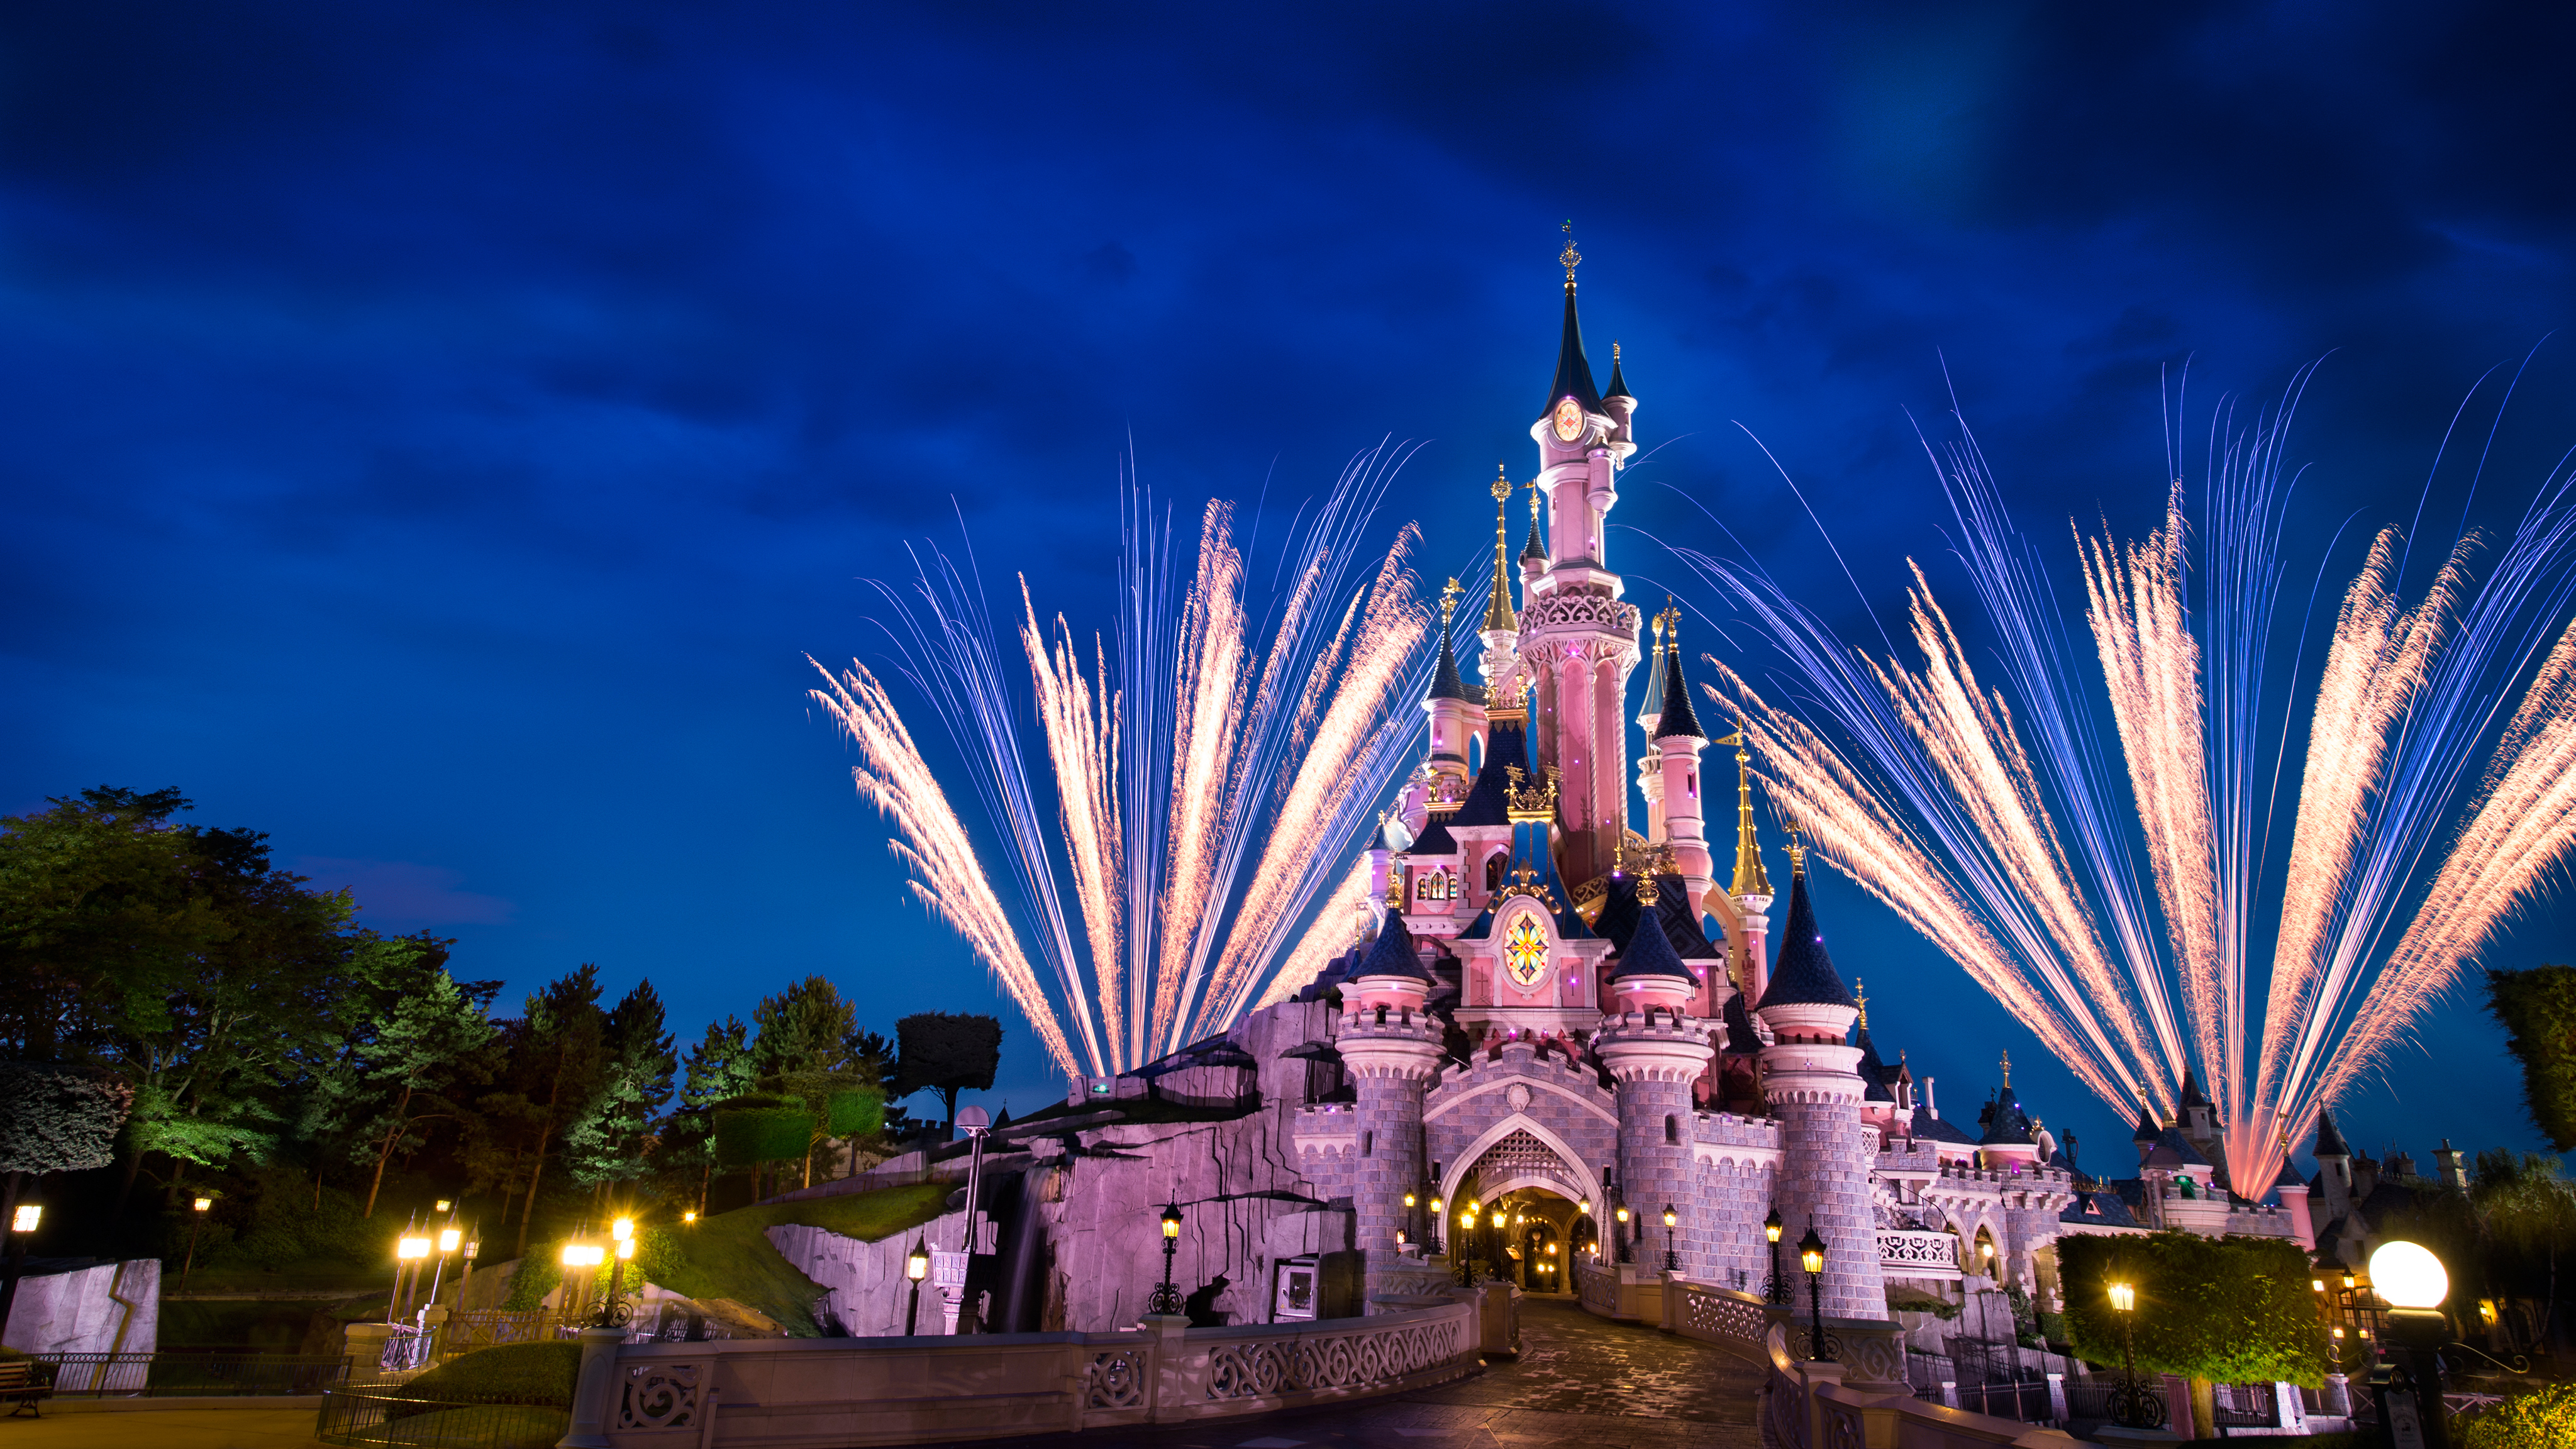 francer 10-Ways-to-Get-the-Most-Out-of-Disneyland-Paris-567ab39429bc4fd28c26ea2f7a2f6226